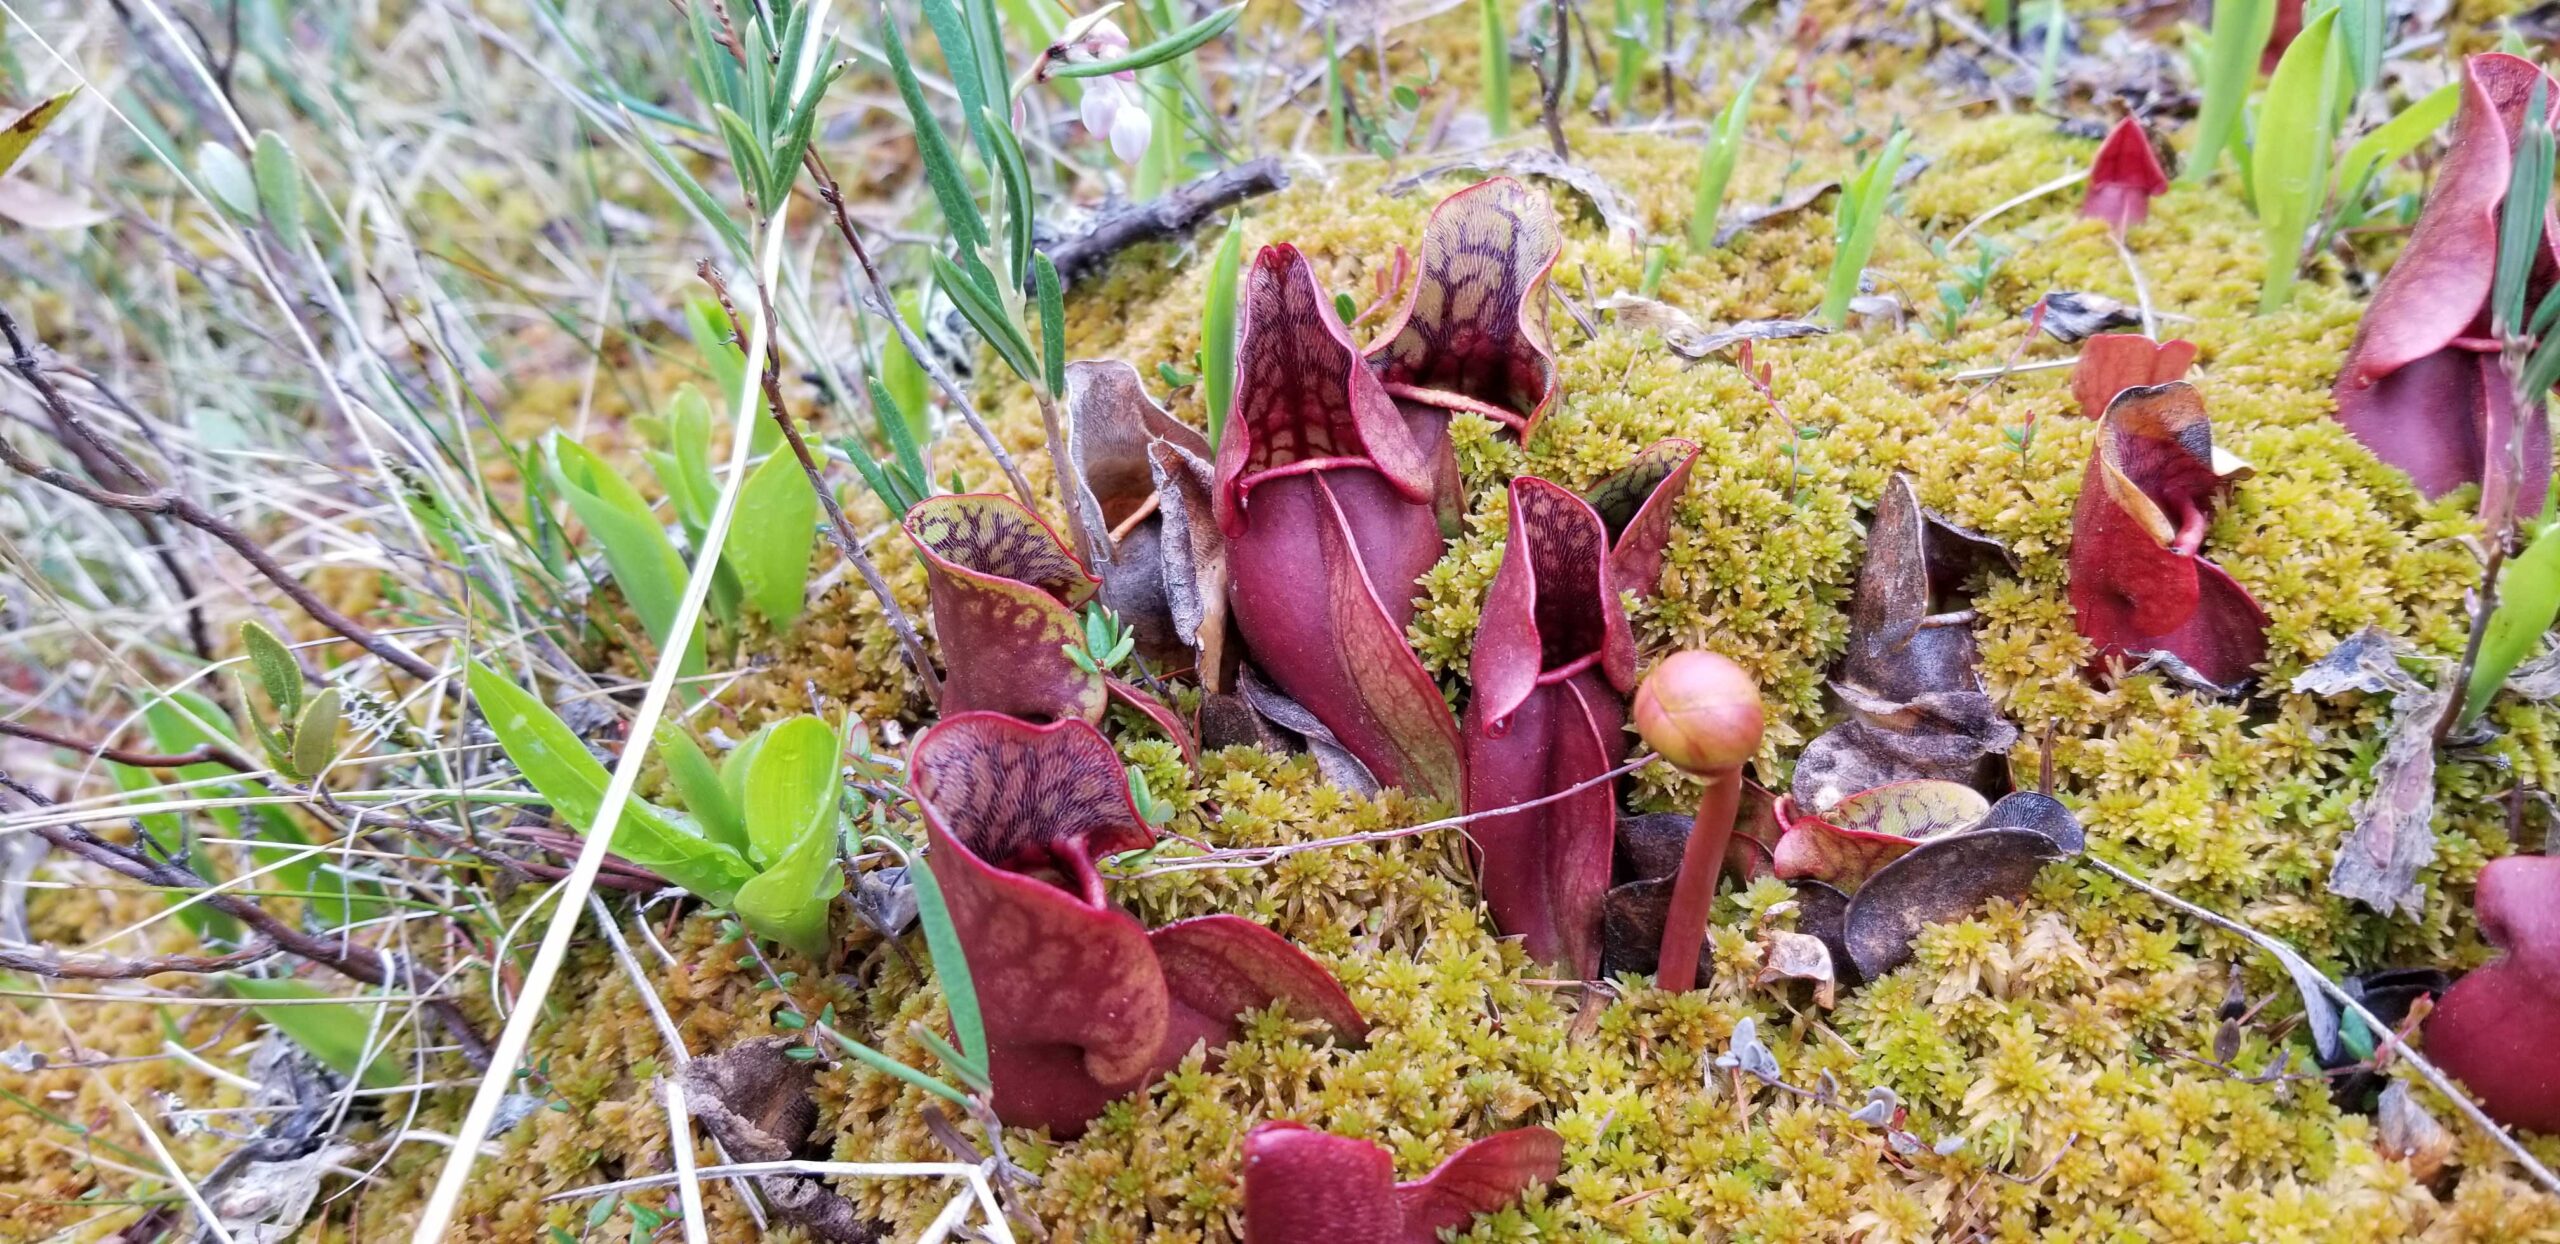 Close-up view of some plants and other vegetation found in Marten Falls.